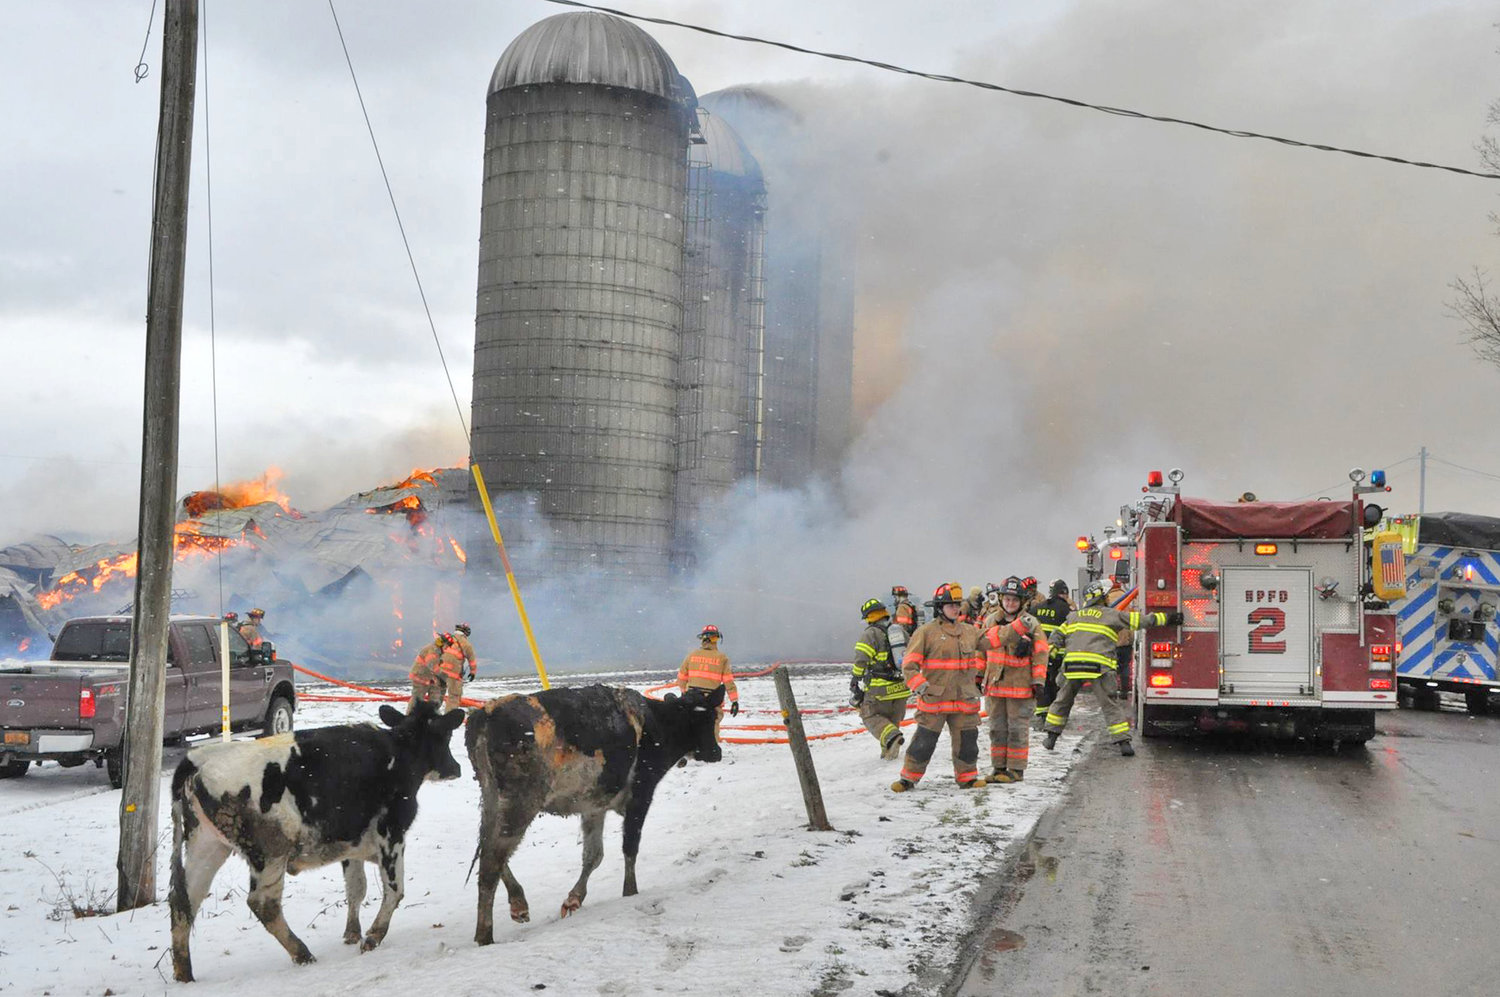 CATTLE LOST — Two surviving cows watch the firefighters work after 250 head of cattle were killed in a barn fire on Whittaker Road in the Town of Trenton on Sunday. Volunteers from seven departments fought the fire. No people were harmed.